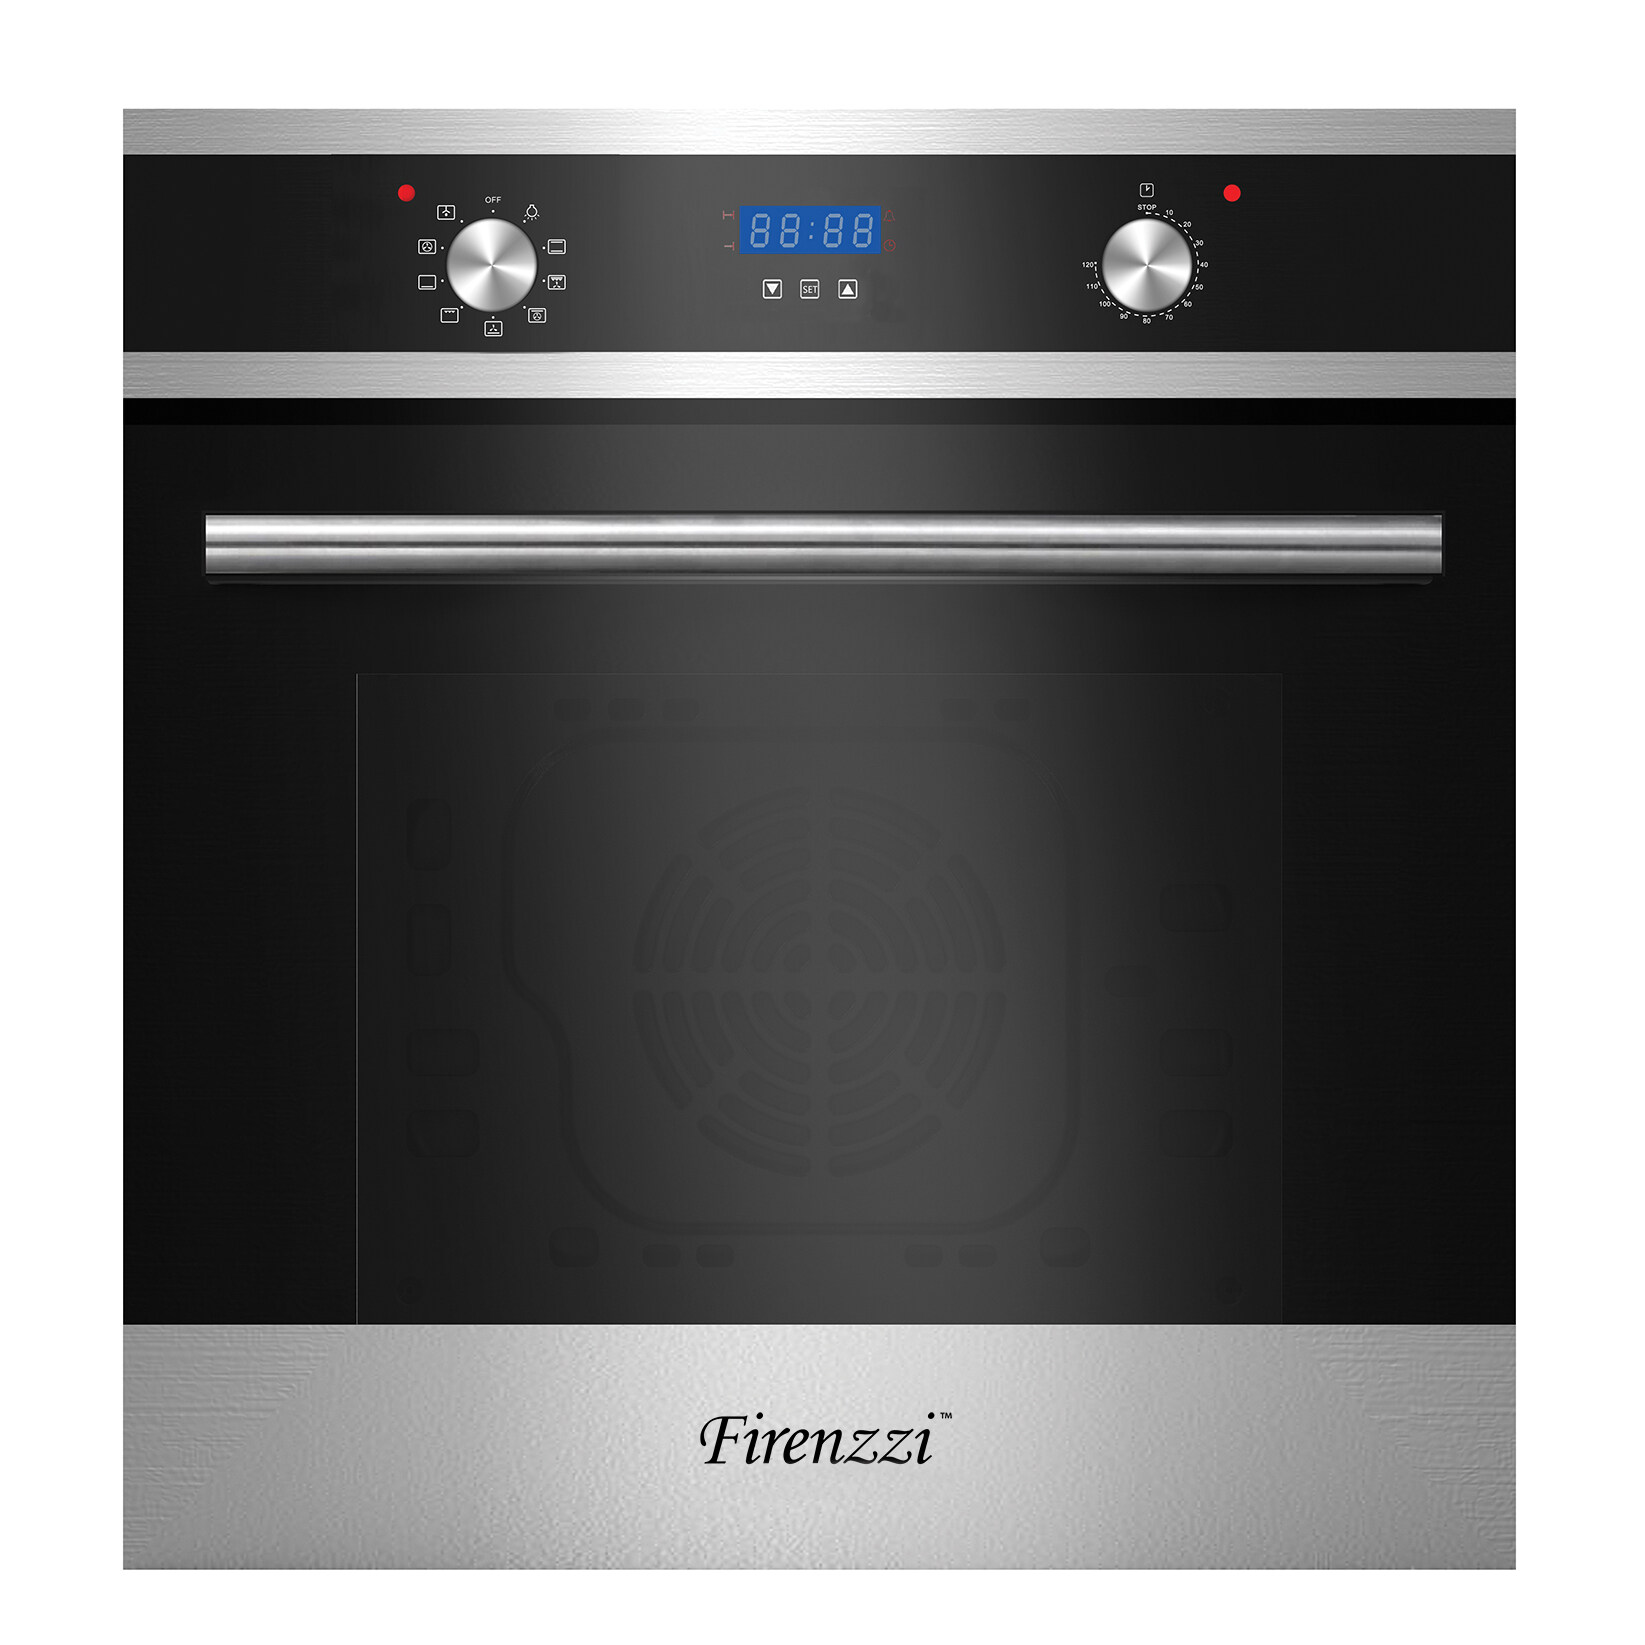 Firenzzi FBO-6068 XP Professional Built-in Oven with 1 Year Warranty (65 Litres & 10 Cooking Functions)